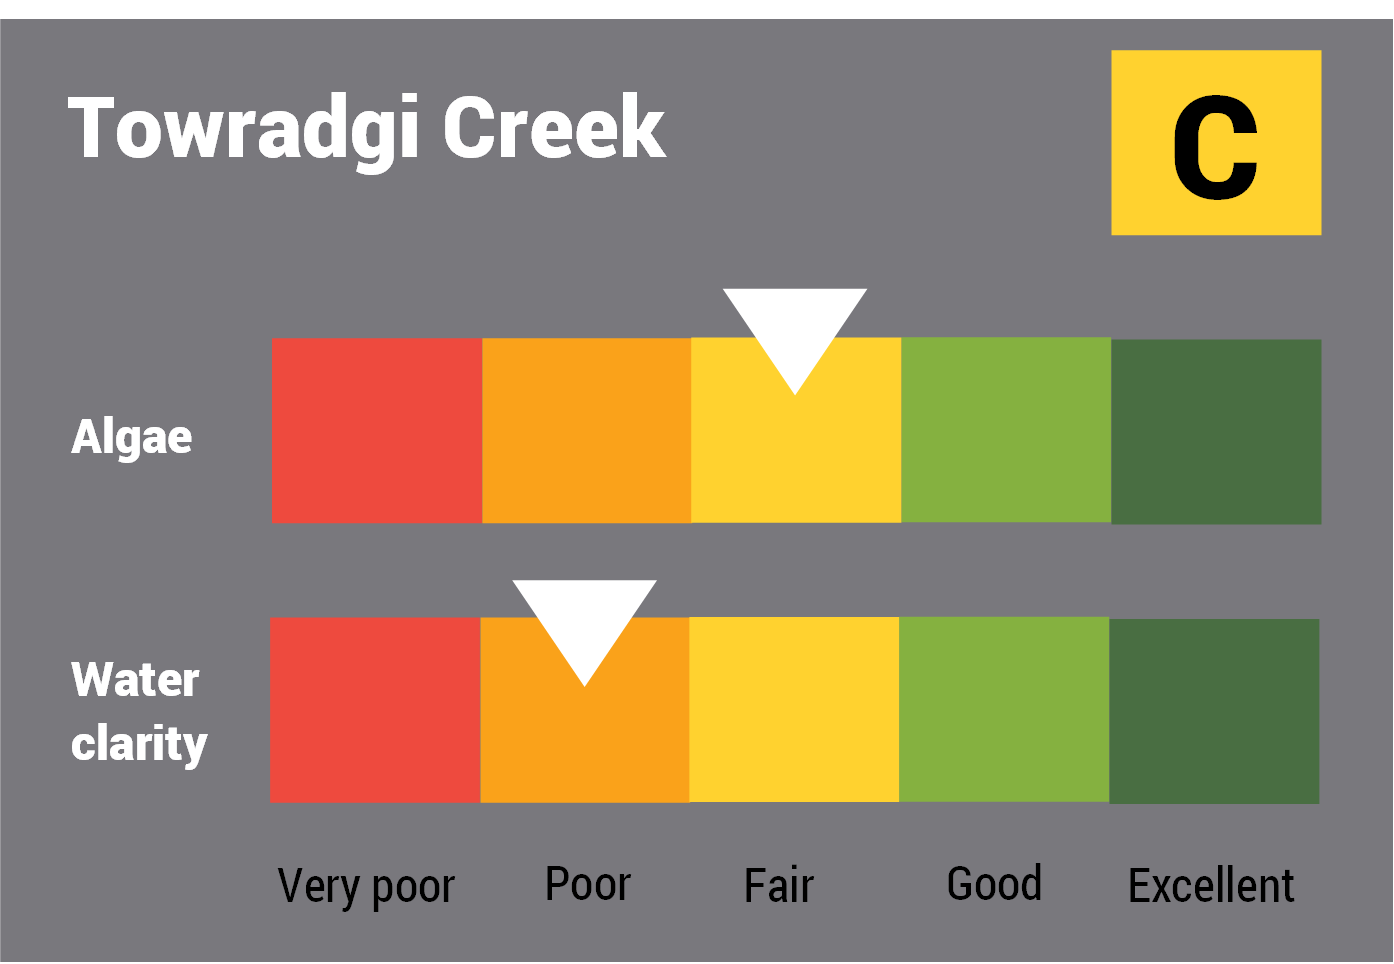 Towradgi Creek water quality report card for algae and water clarity showing colour-coded ratings (red, orange, yellow, light green and dark green, which represent very poor, poor, fair, good and excellent, respectively). Algae is rated 'fair' and water clarity is rated 'poor' giving an overall rating of 'poor' or 'D'.